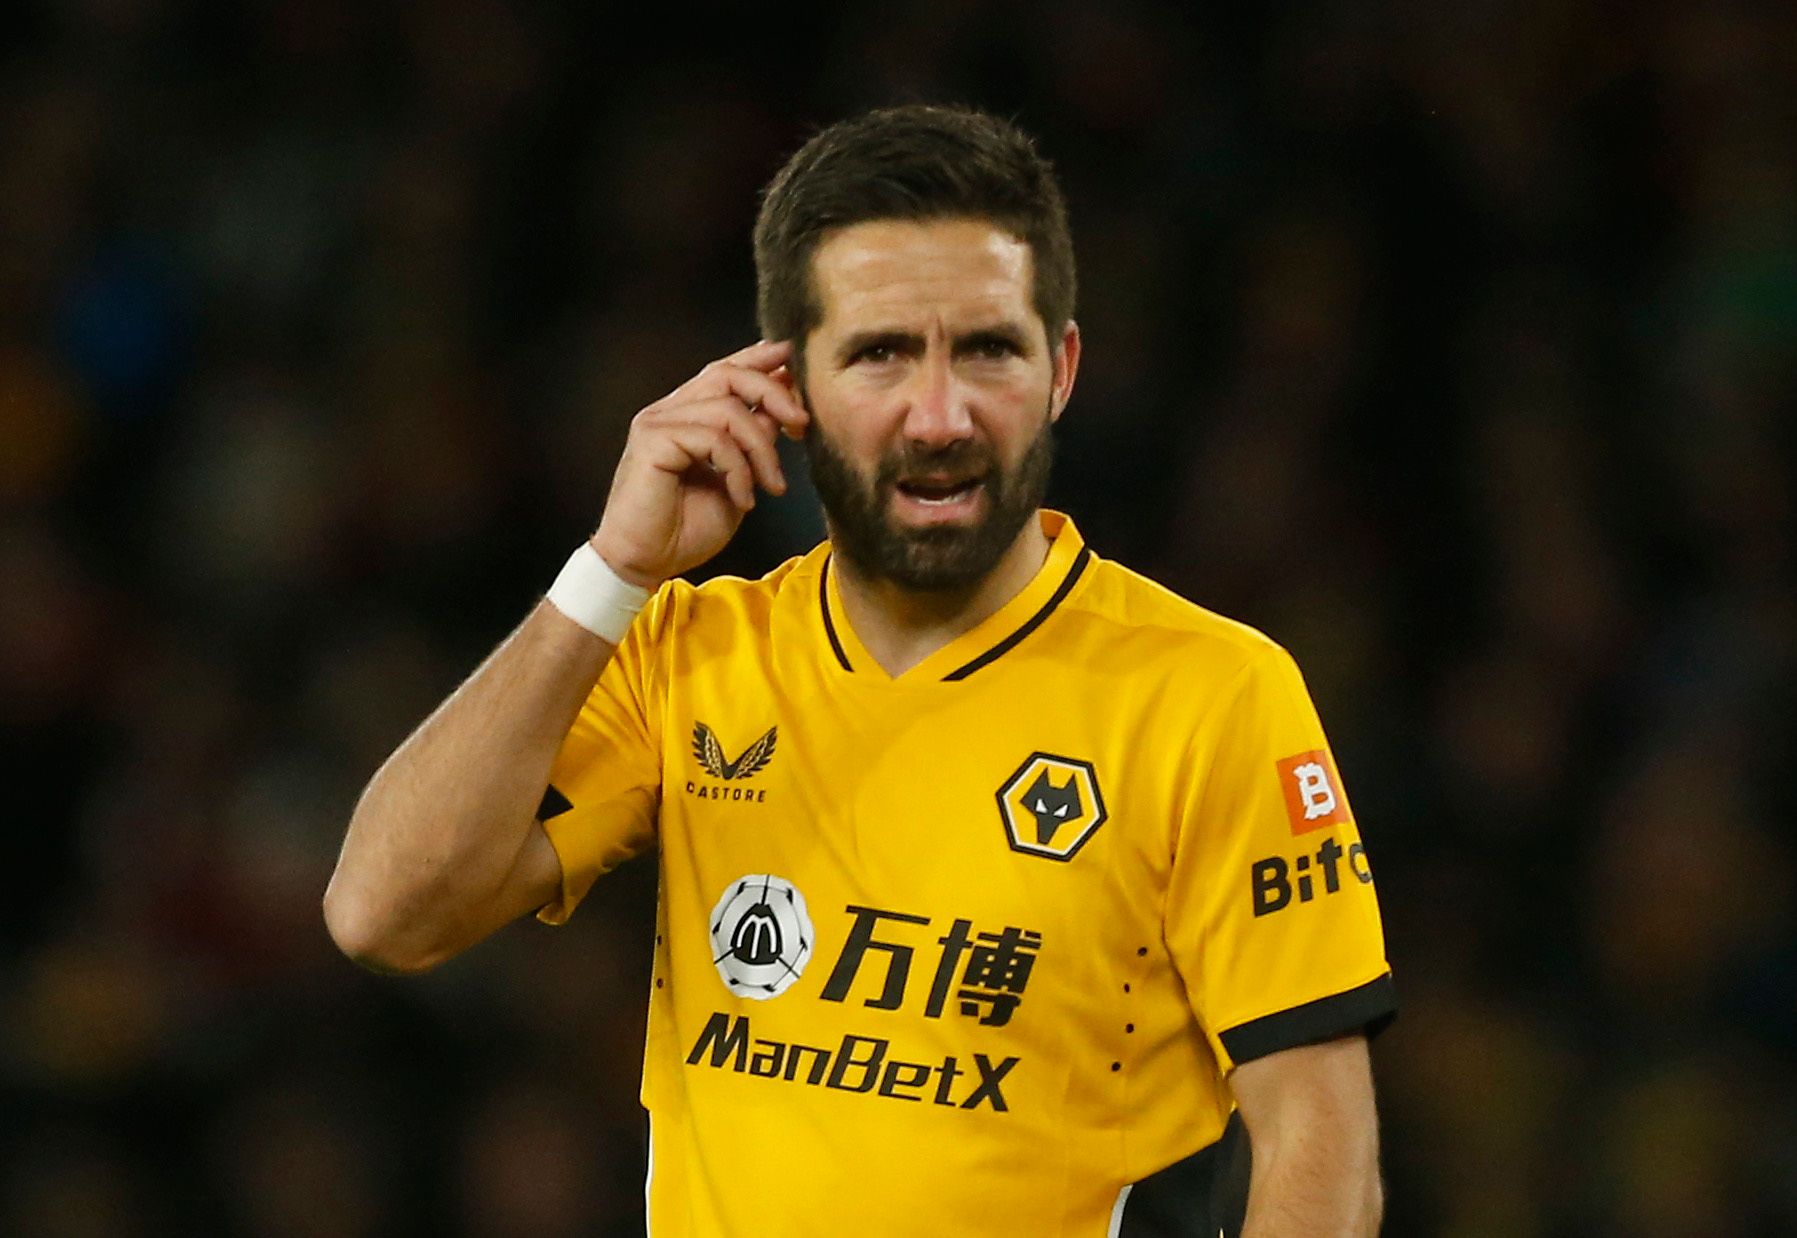 Bruno Lage, Fosun, Jeff Shi, Molineux, The Old Gold, Wolves, Wolves fans, Wolves info, Wolves latest, Wolves news, Wolves updates, WWFC, WWFC news, WWFC update, Premier League, Premier League news, Wolverhampton Wanderers, Wolves transfer news, January transfer window, Joao Moutinho, AS Roma, Jose Mourinho, 
